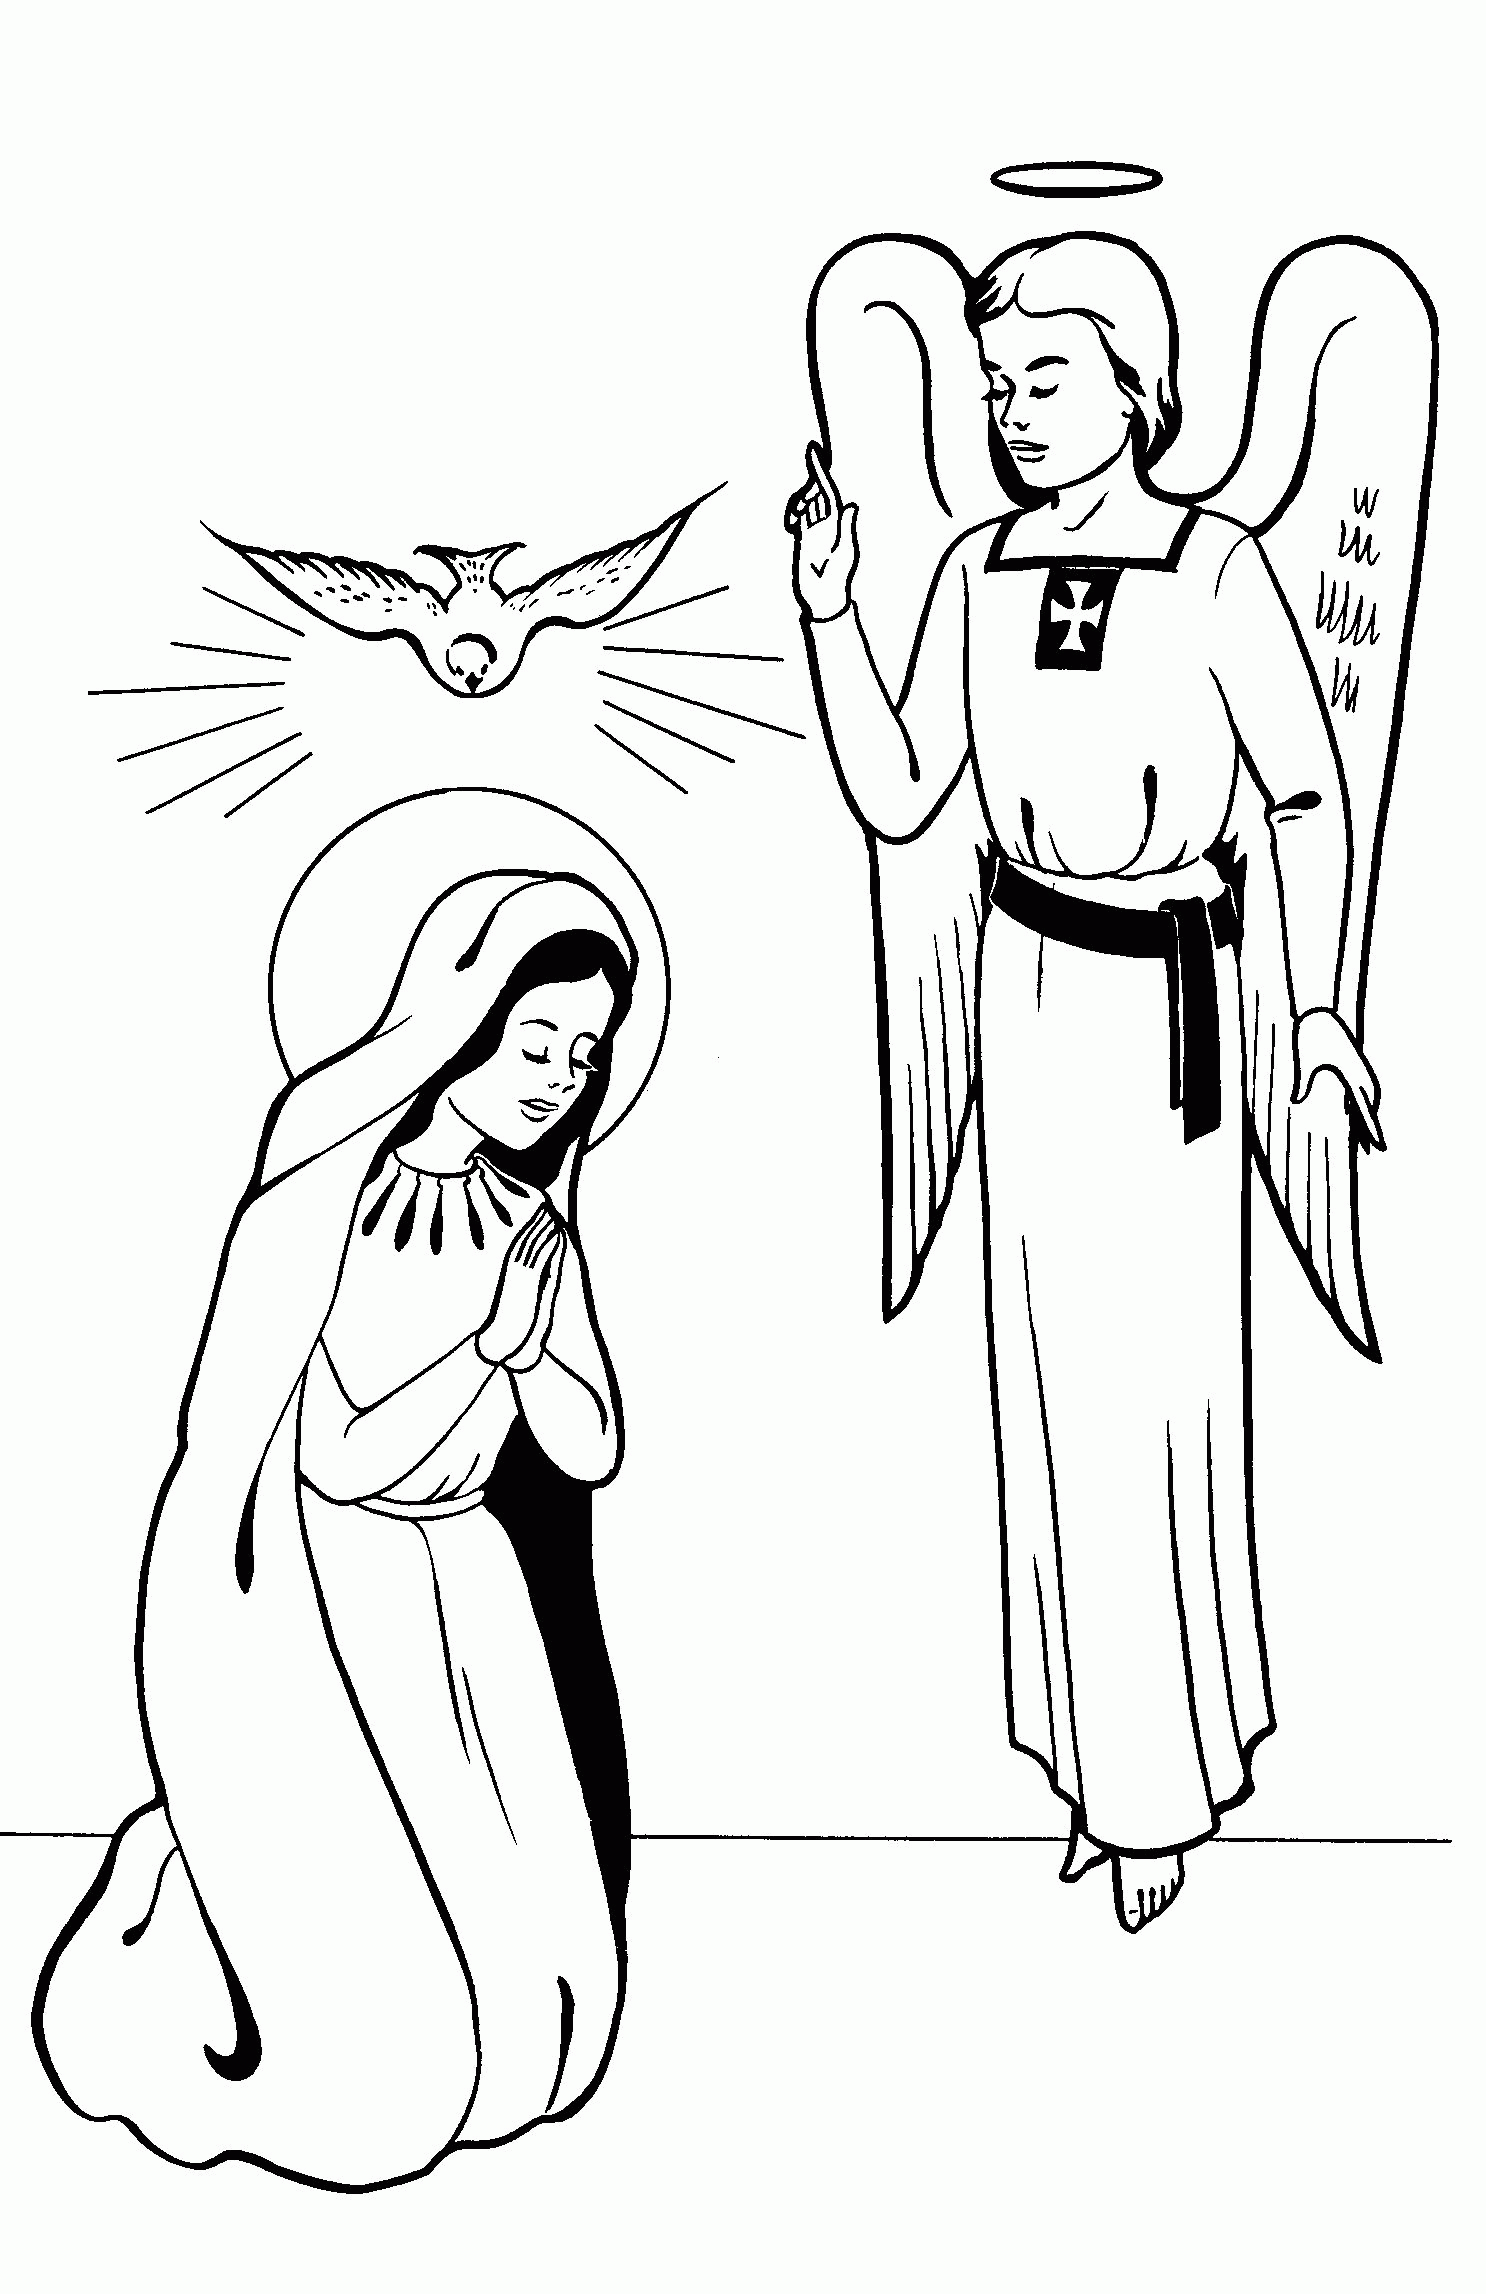 lent clipart mother mary